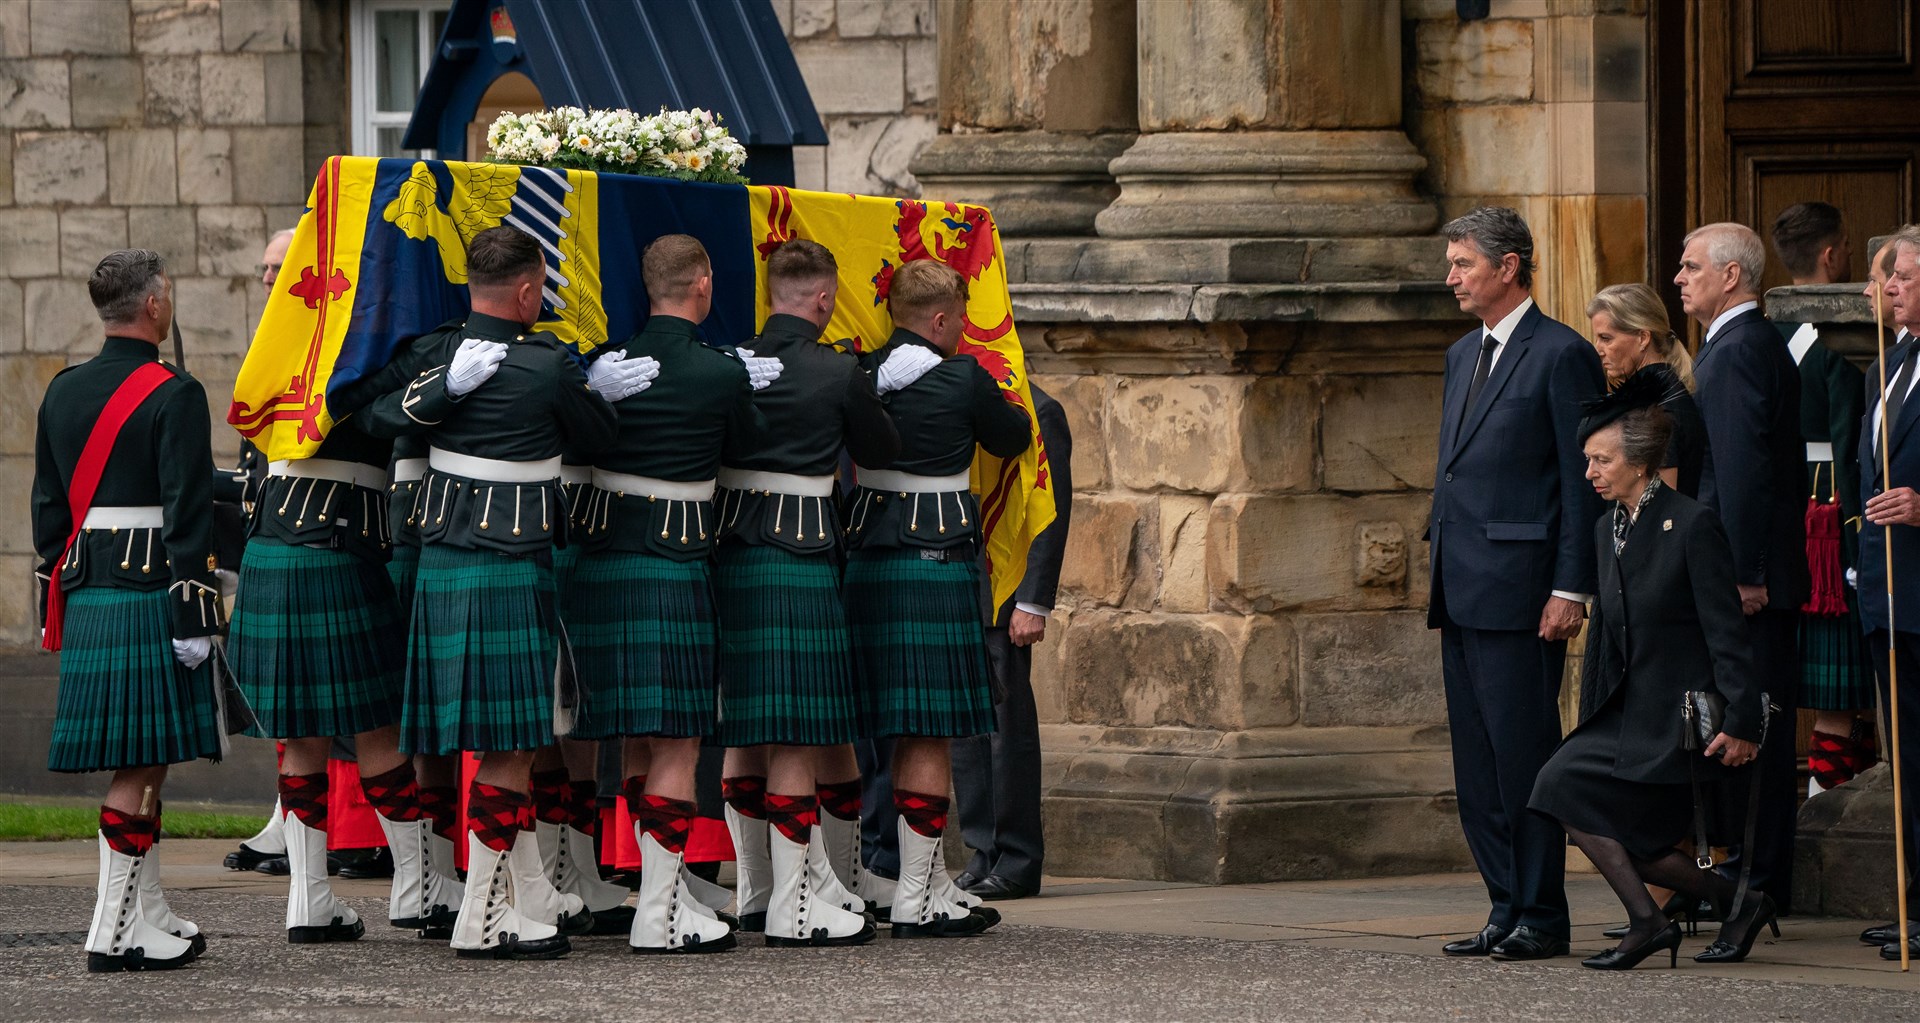 The Princess Royal curtsying as her mother’s coffin is carried into the Palace of Holyroodhouse (Aaron Chown/PA)